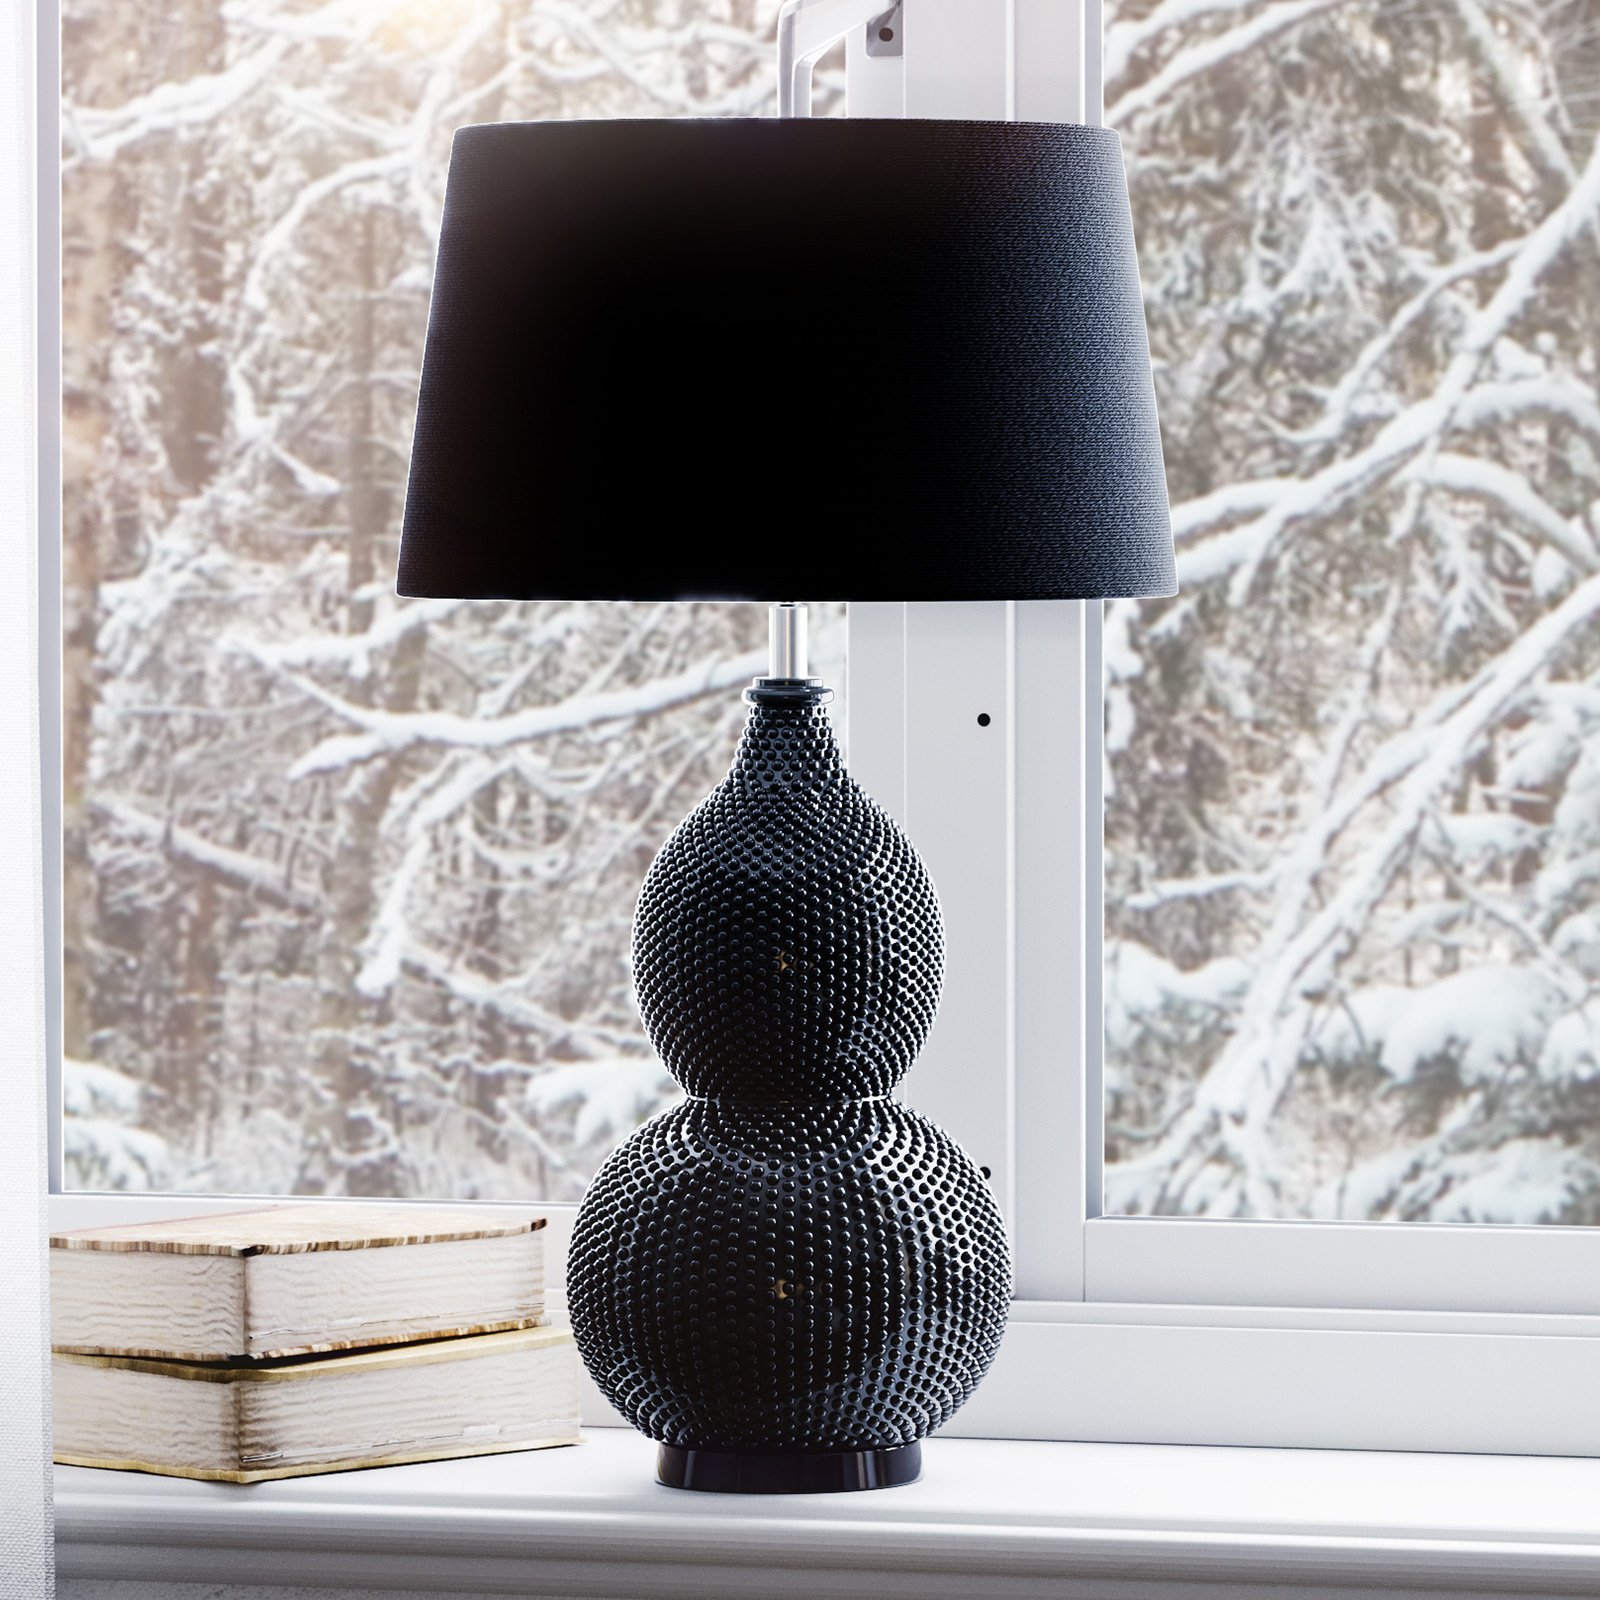 By Rydéns Lofty table lamp, black fabric lampshade